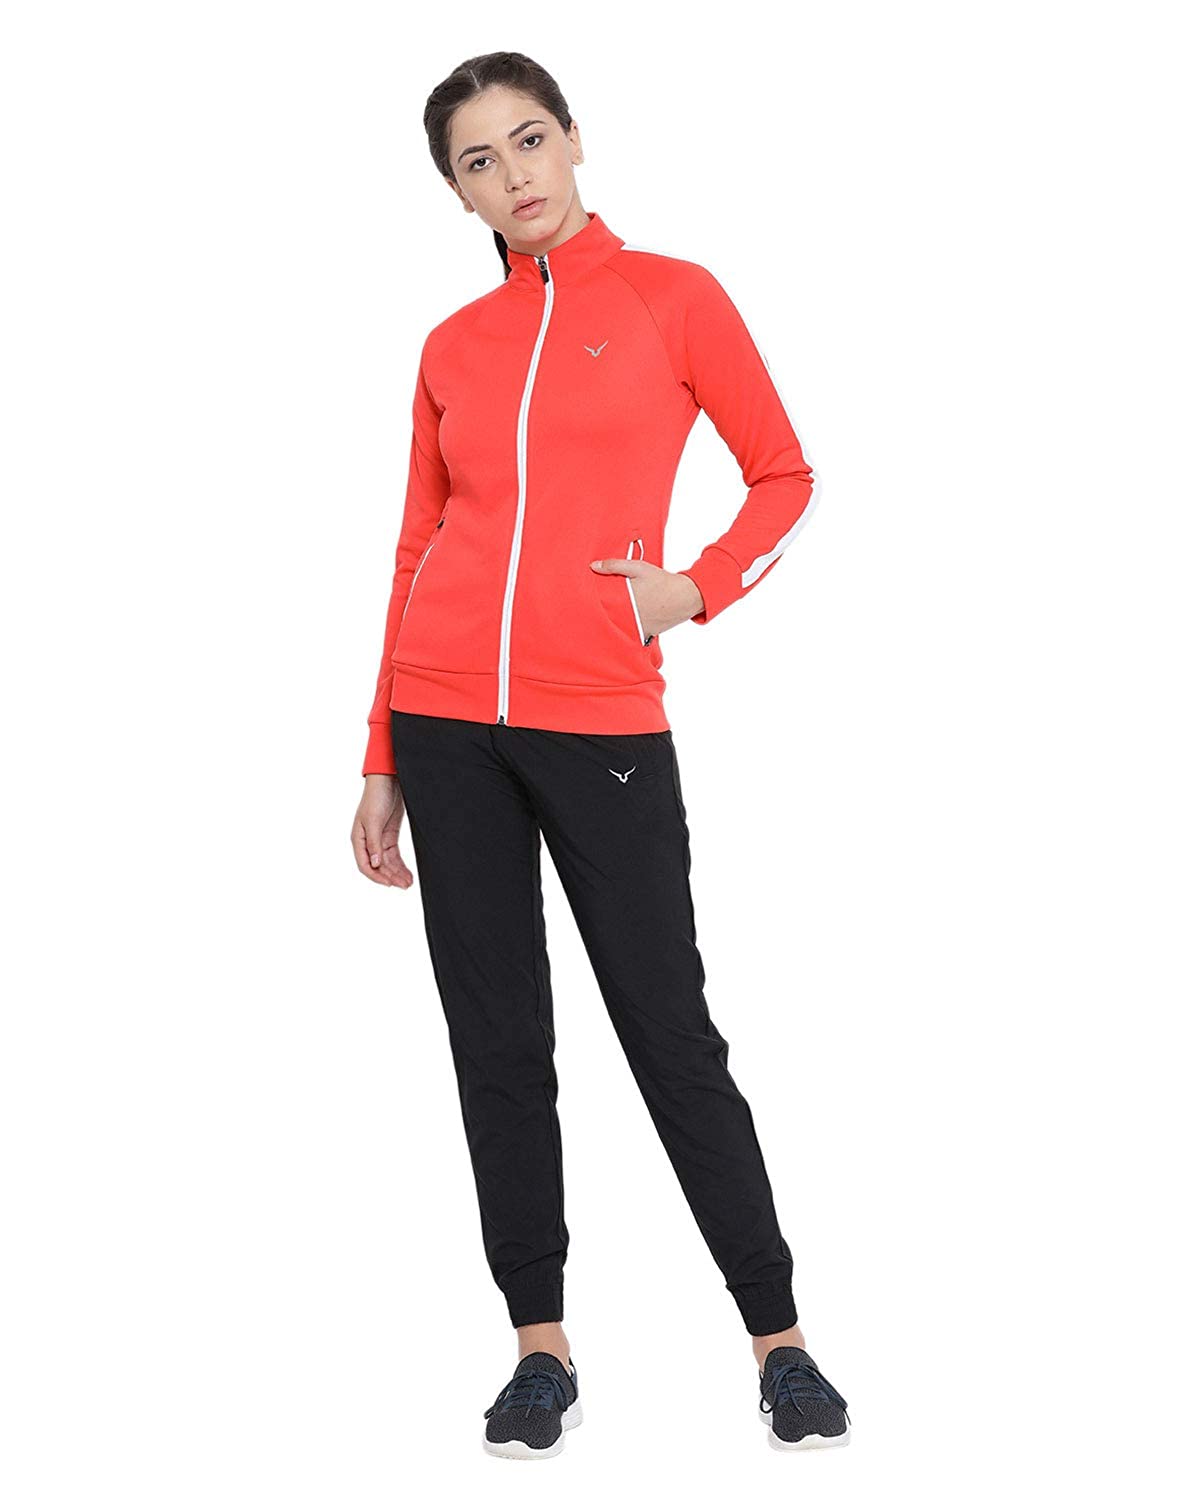 Invincible Women's Athleisure Legacy Jackets